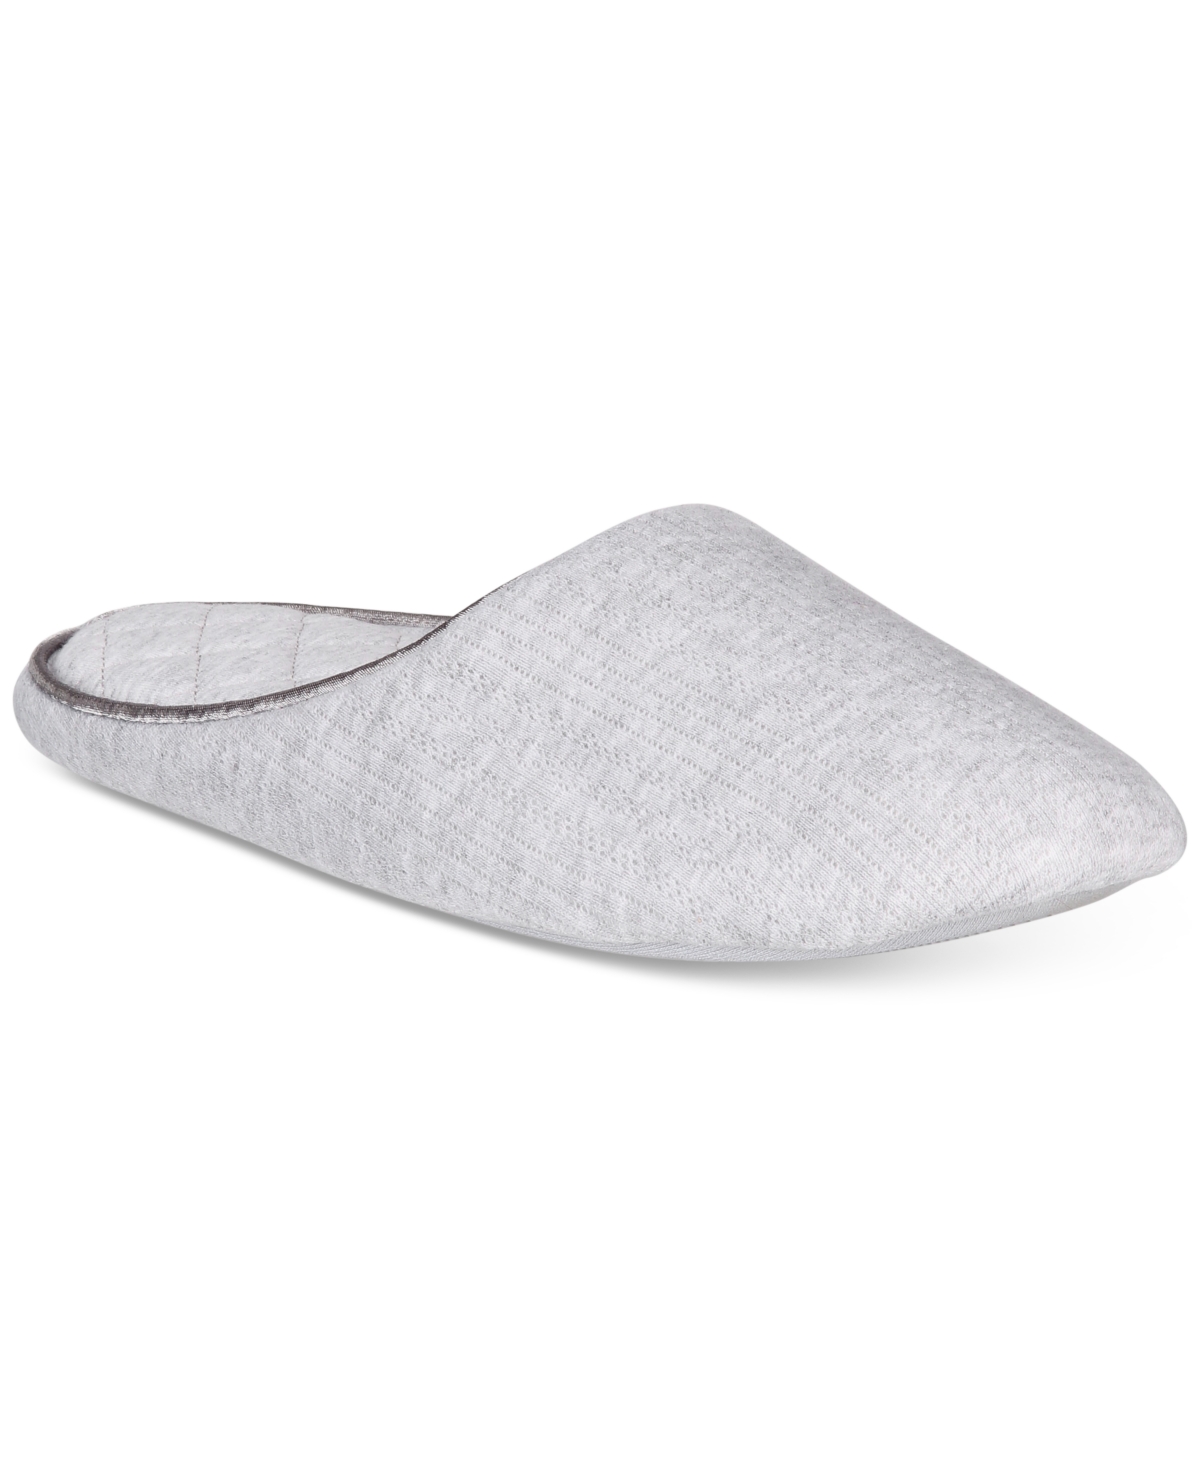 Pointelle Closed-Toe Slippers, Created for Macy's - Dove Grey Hthr